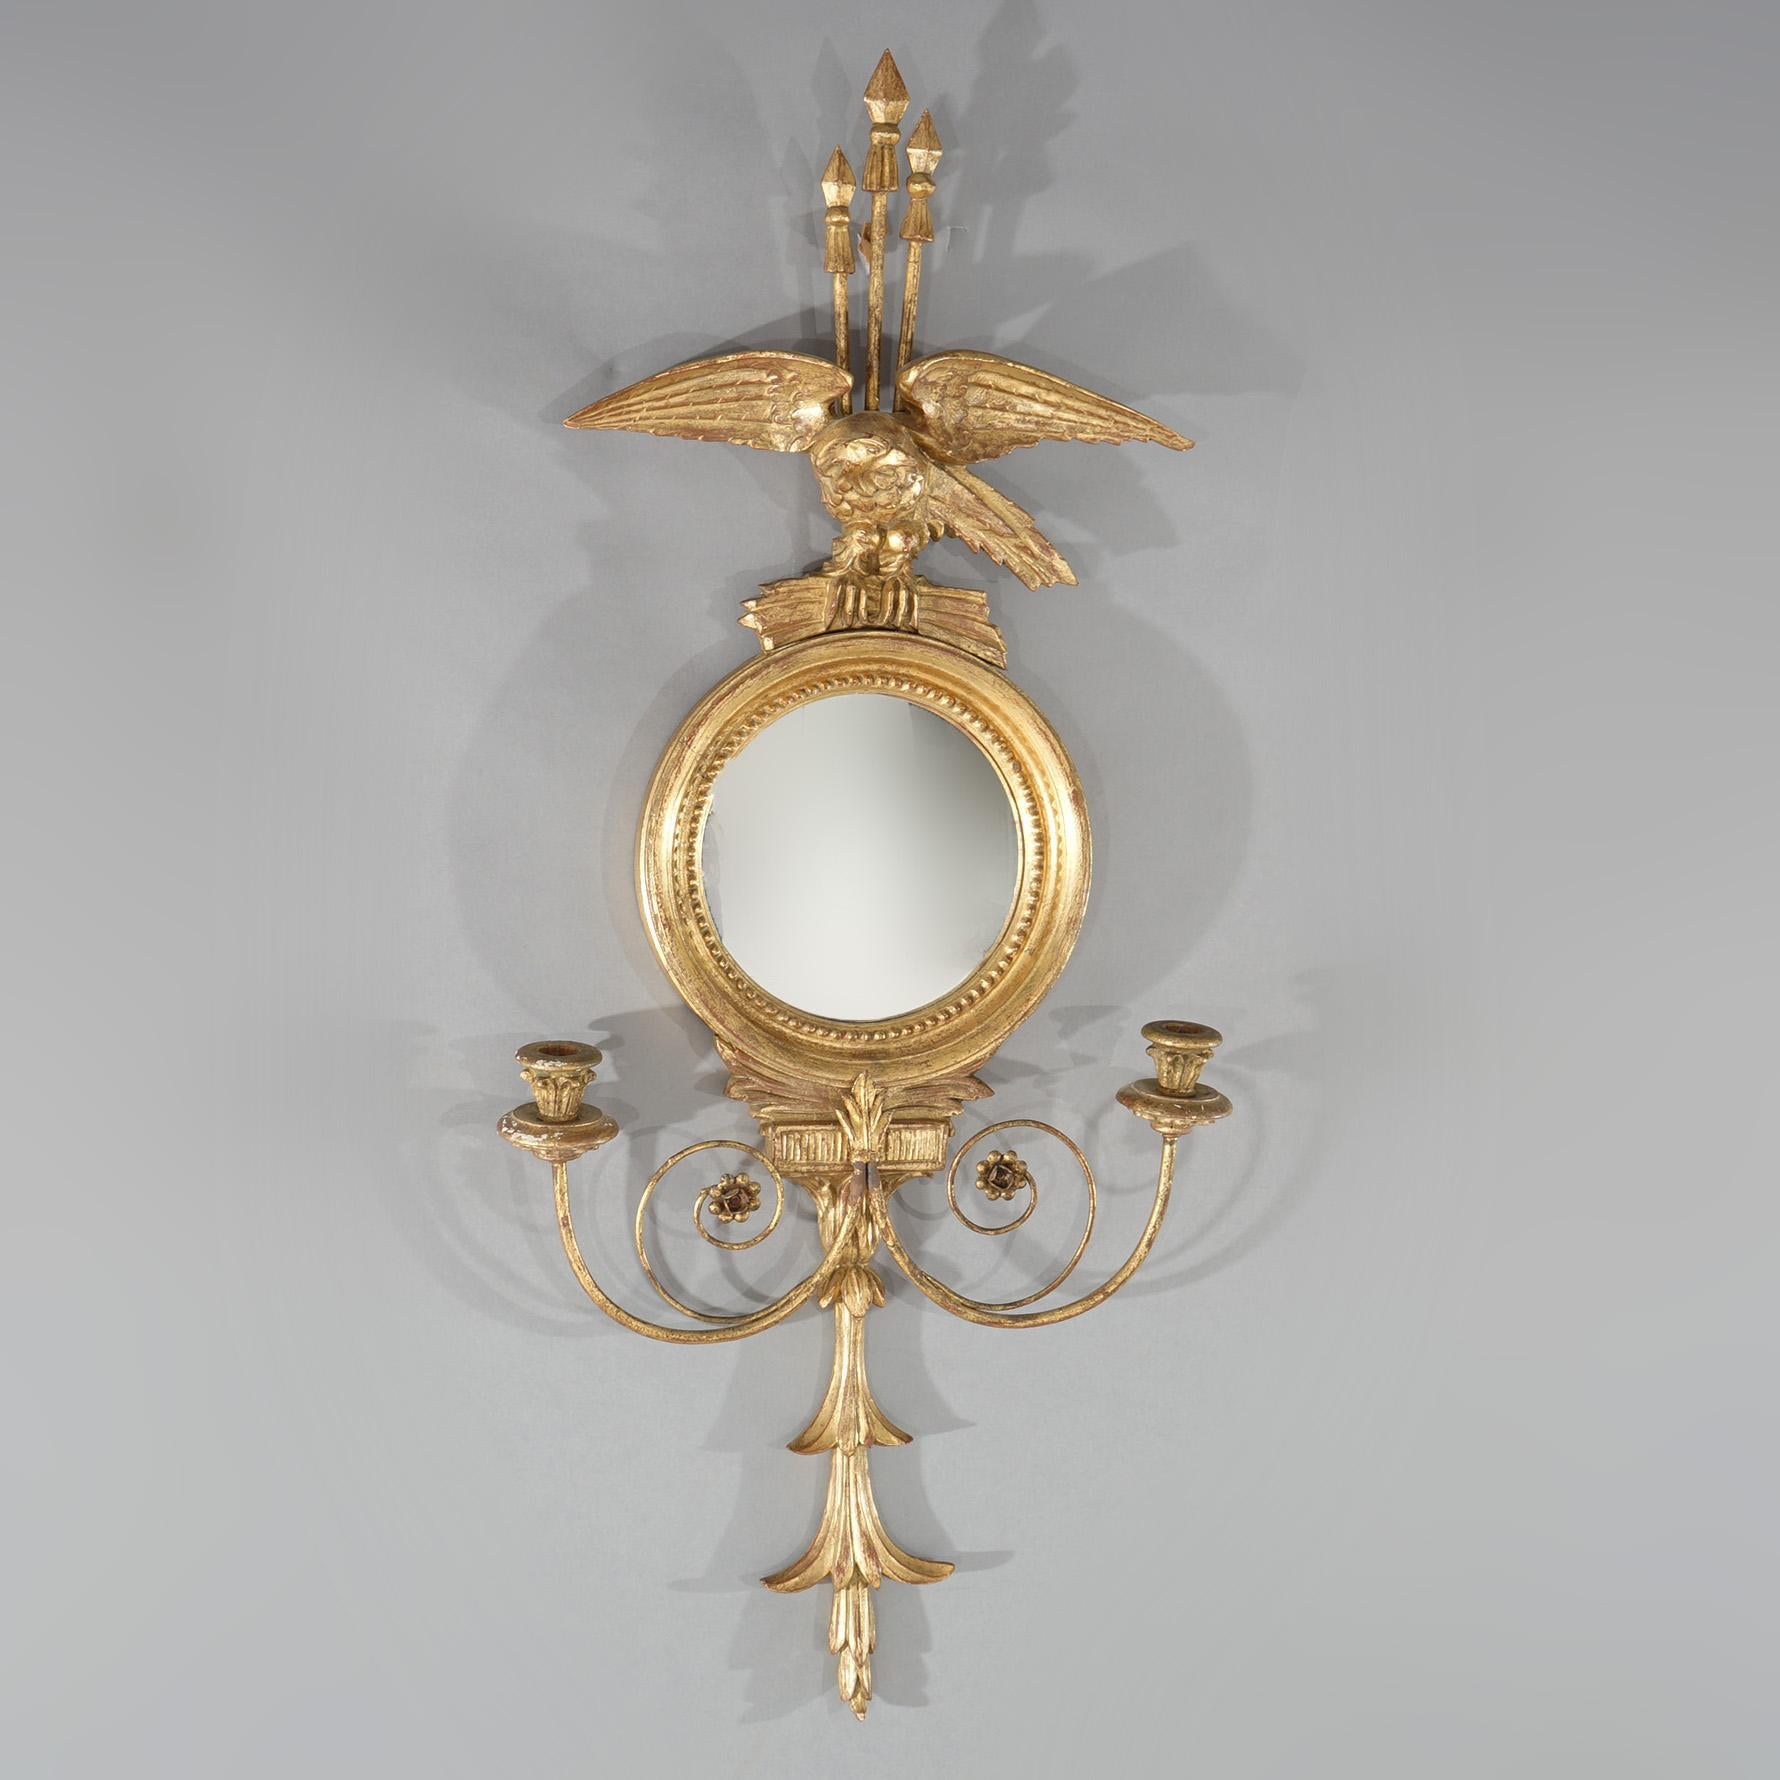 An antique Classical Italian figural bullseye mirror offers giltwood construction with eagle or phoenix crest over convex mirror having double scroll form arms terminating in candle sockets, c1920

Measures- 37.5''H x 17''W x 3.5''D; 36.5'' x 27.5''